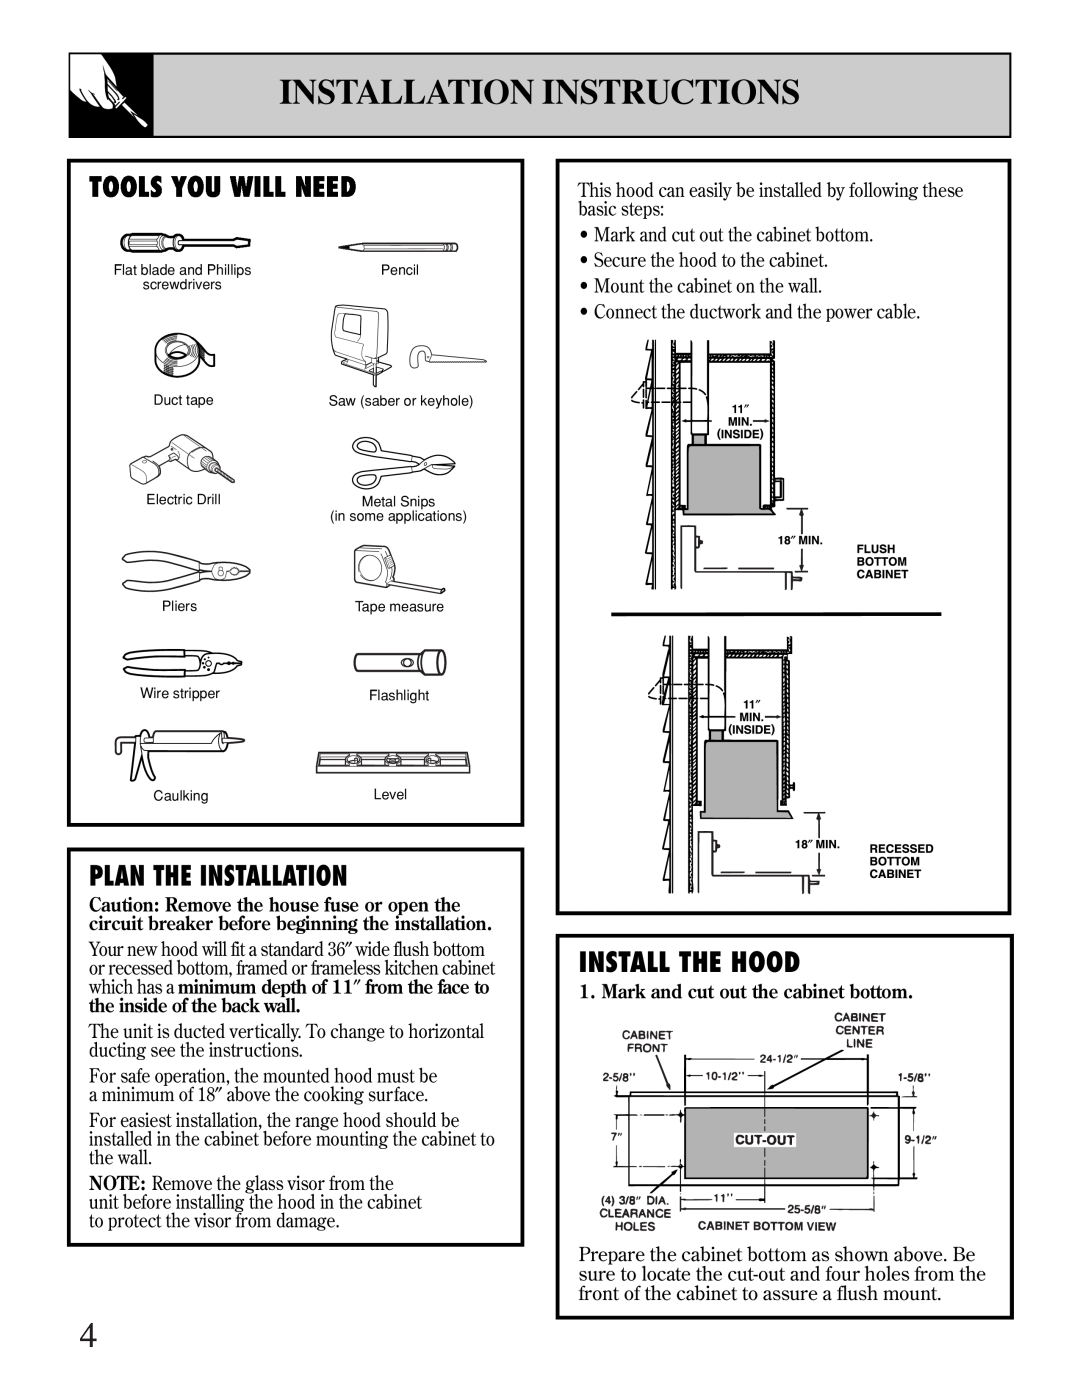 GE JV696, JV695 Installation Instructions, Mark and cut out the cabinet bottom, Tools You Will Need, Plan The Installation 